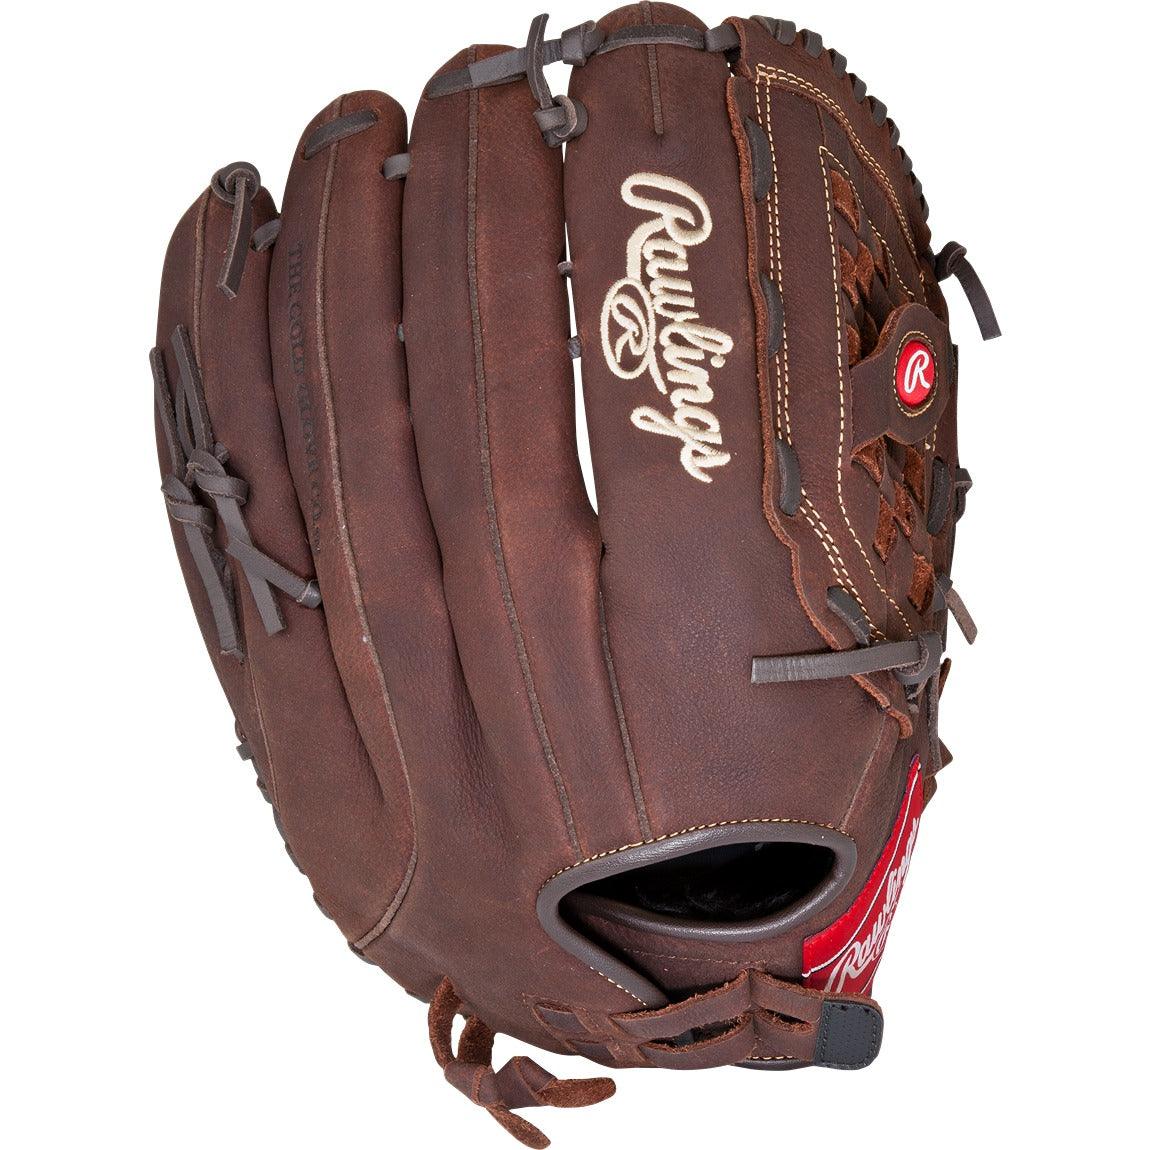 Player Preferred 14" Adult Softball Glove - Sports Excellence